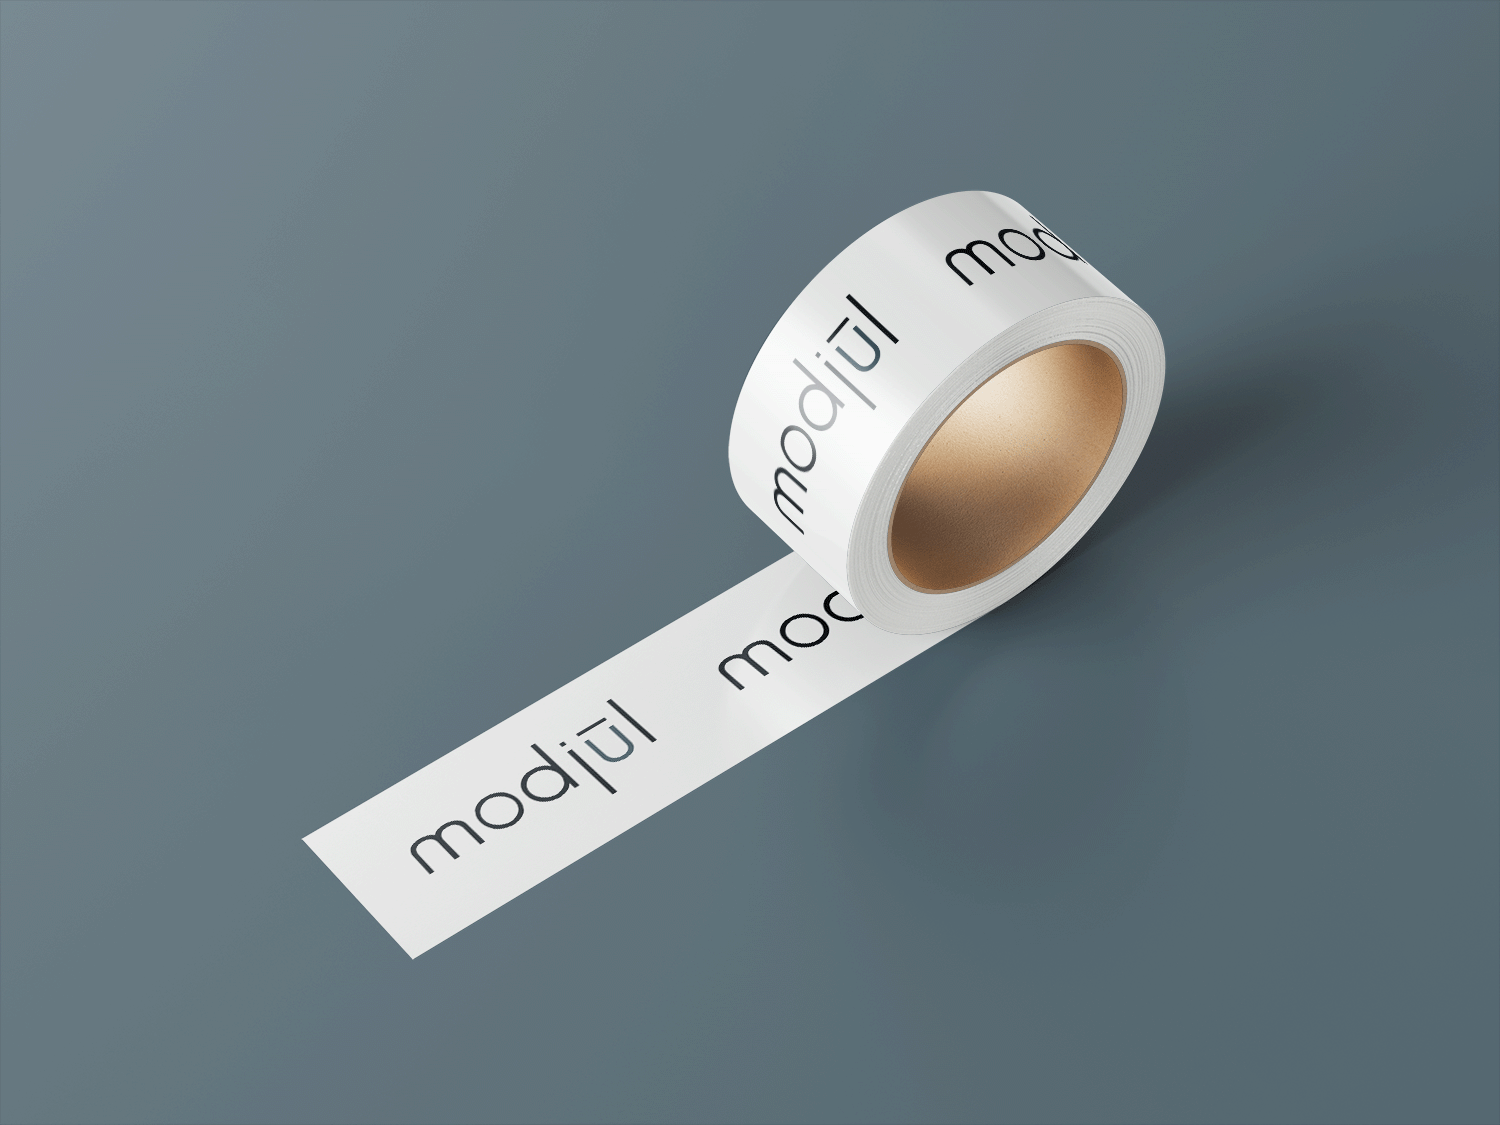 A mockup of the packing tape displaying the modjūl logo.